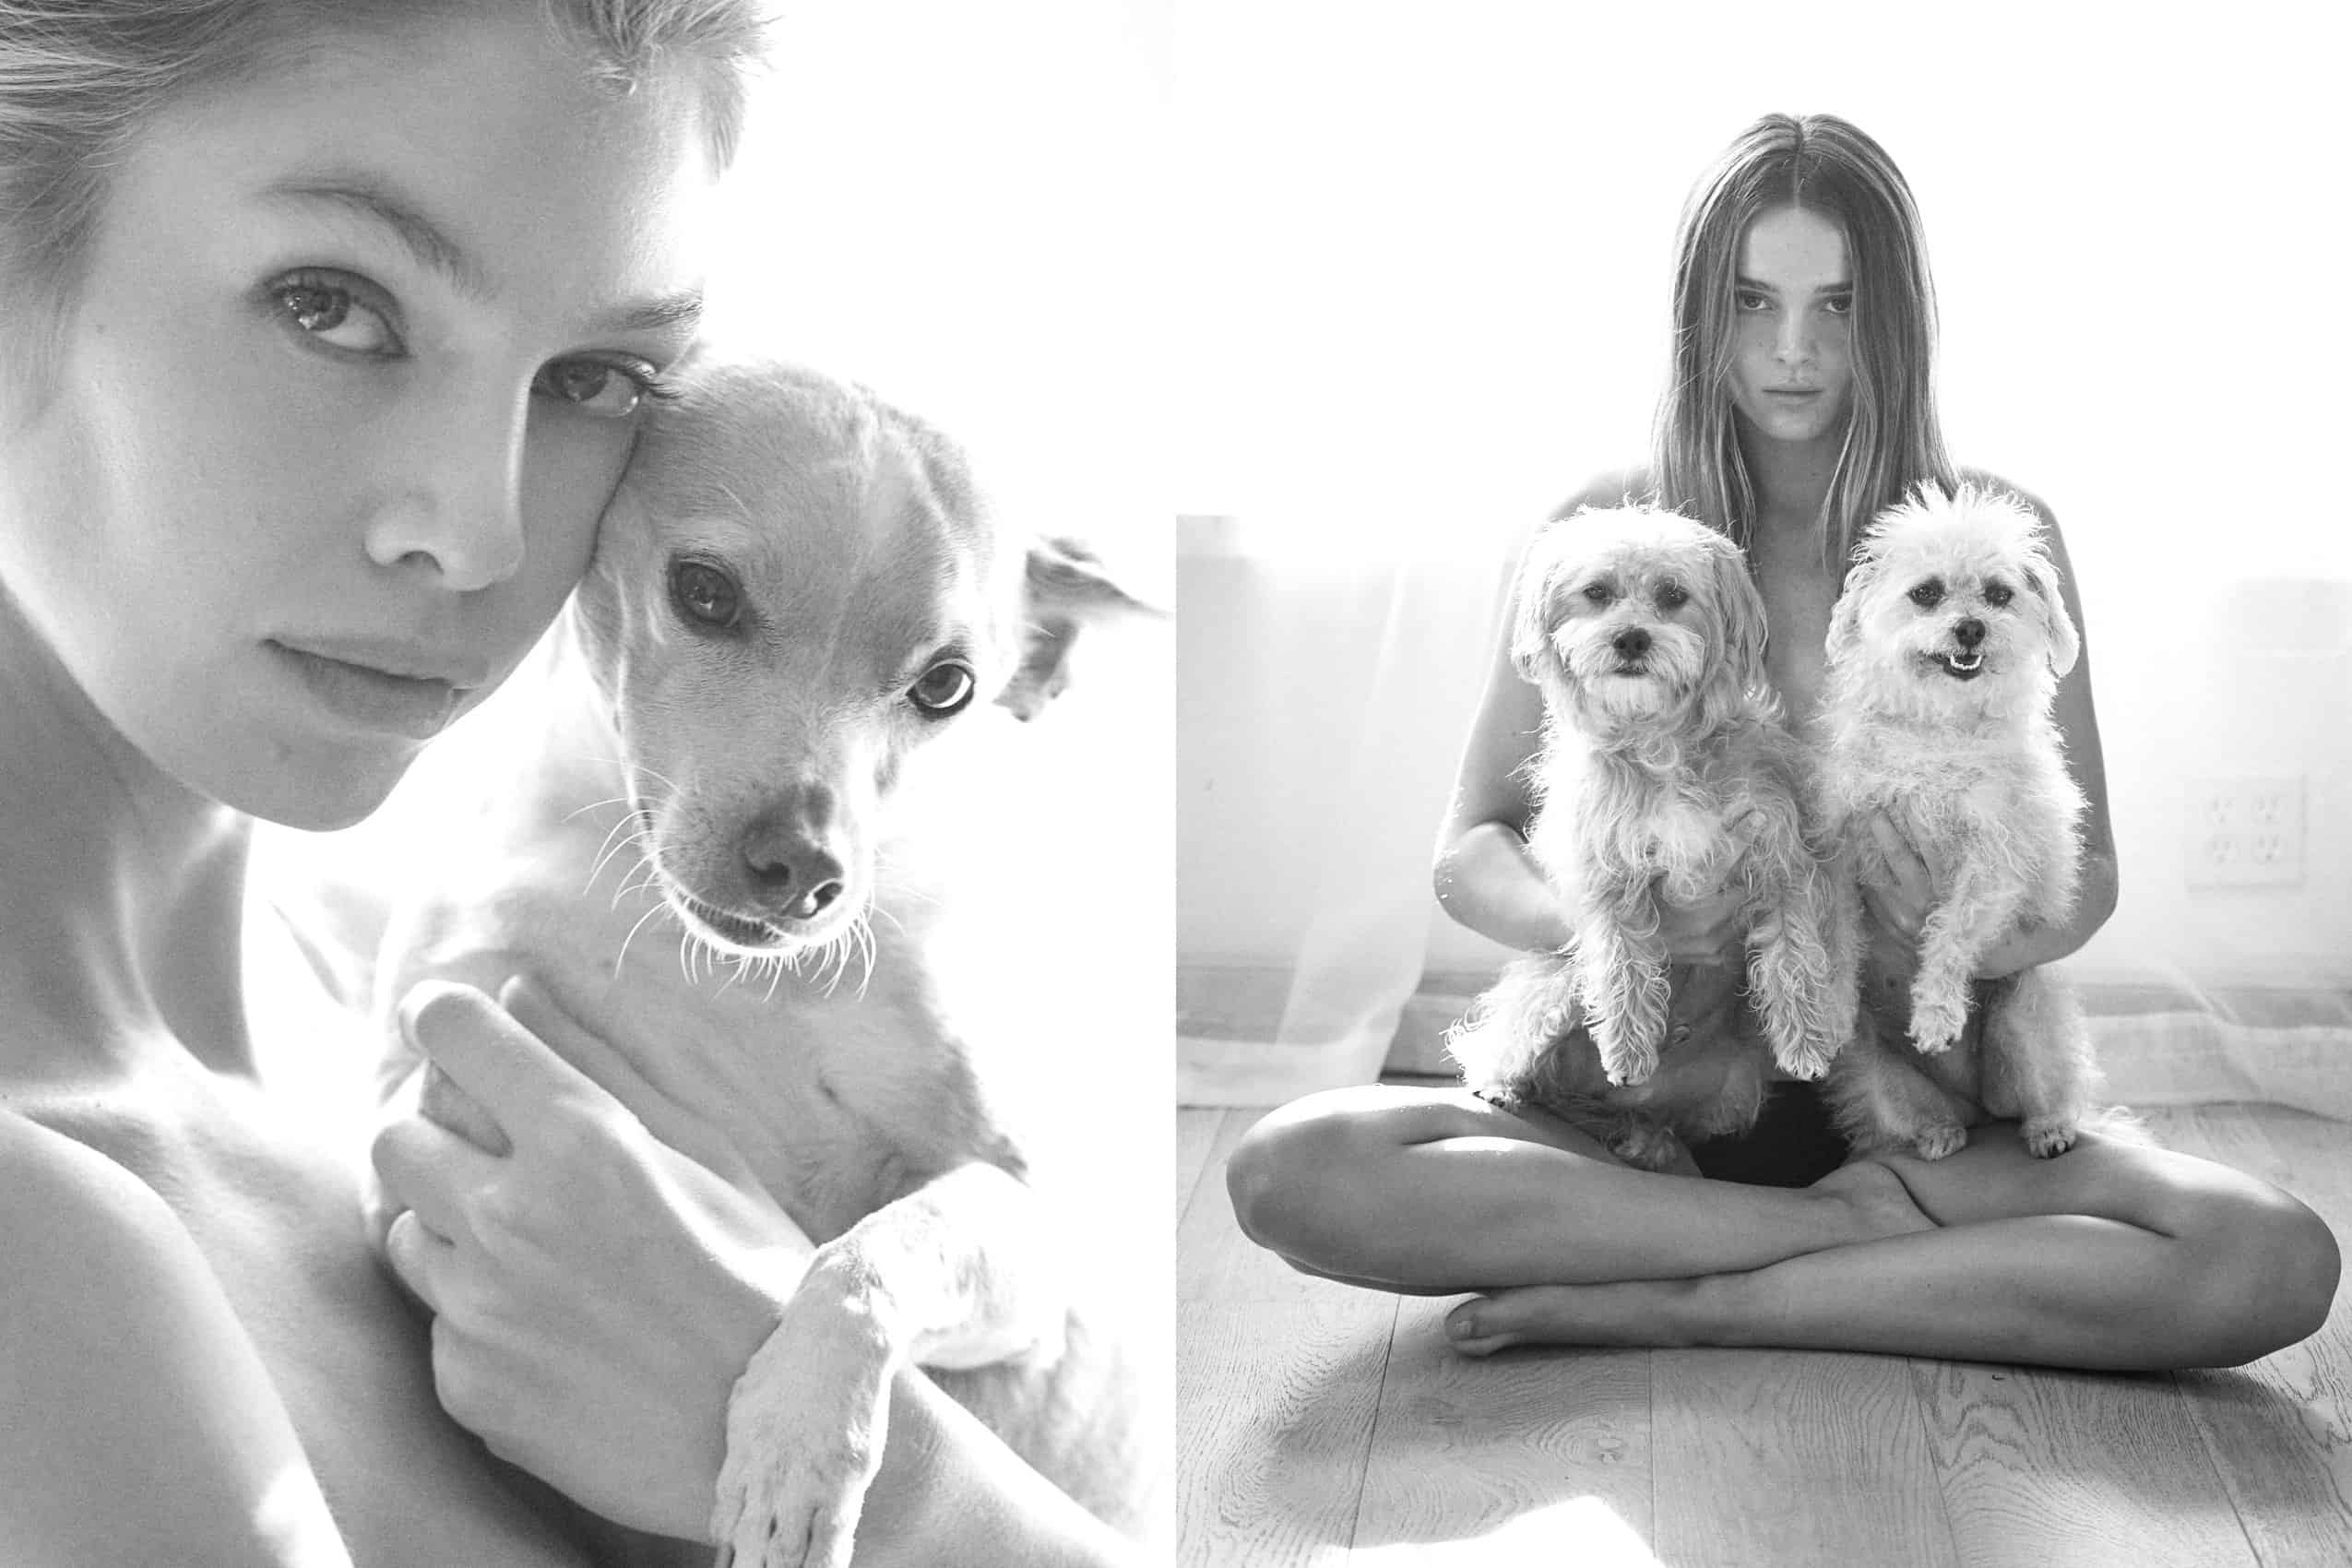 Stella Maxwell & Charlotte Lawrence Launch New Luxe Pet Brand Peropero